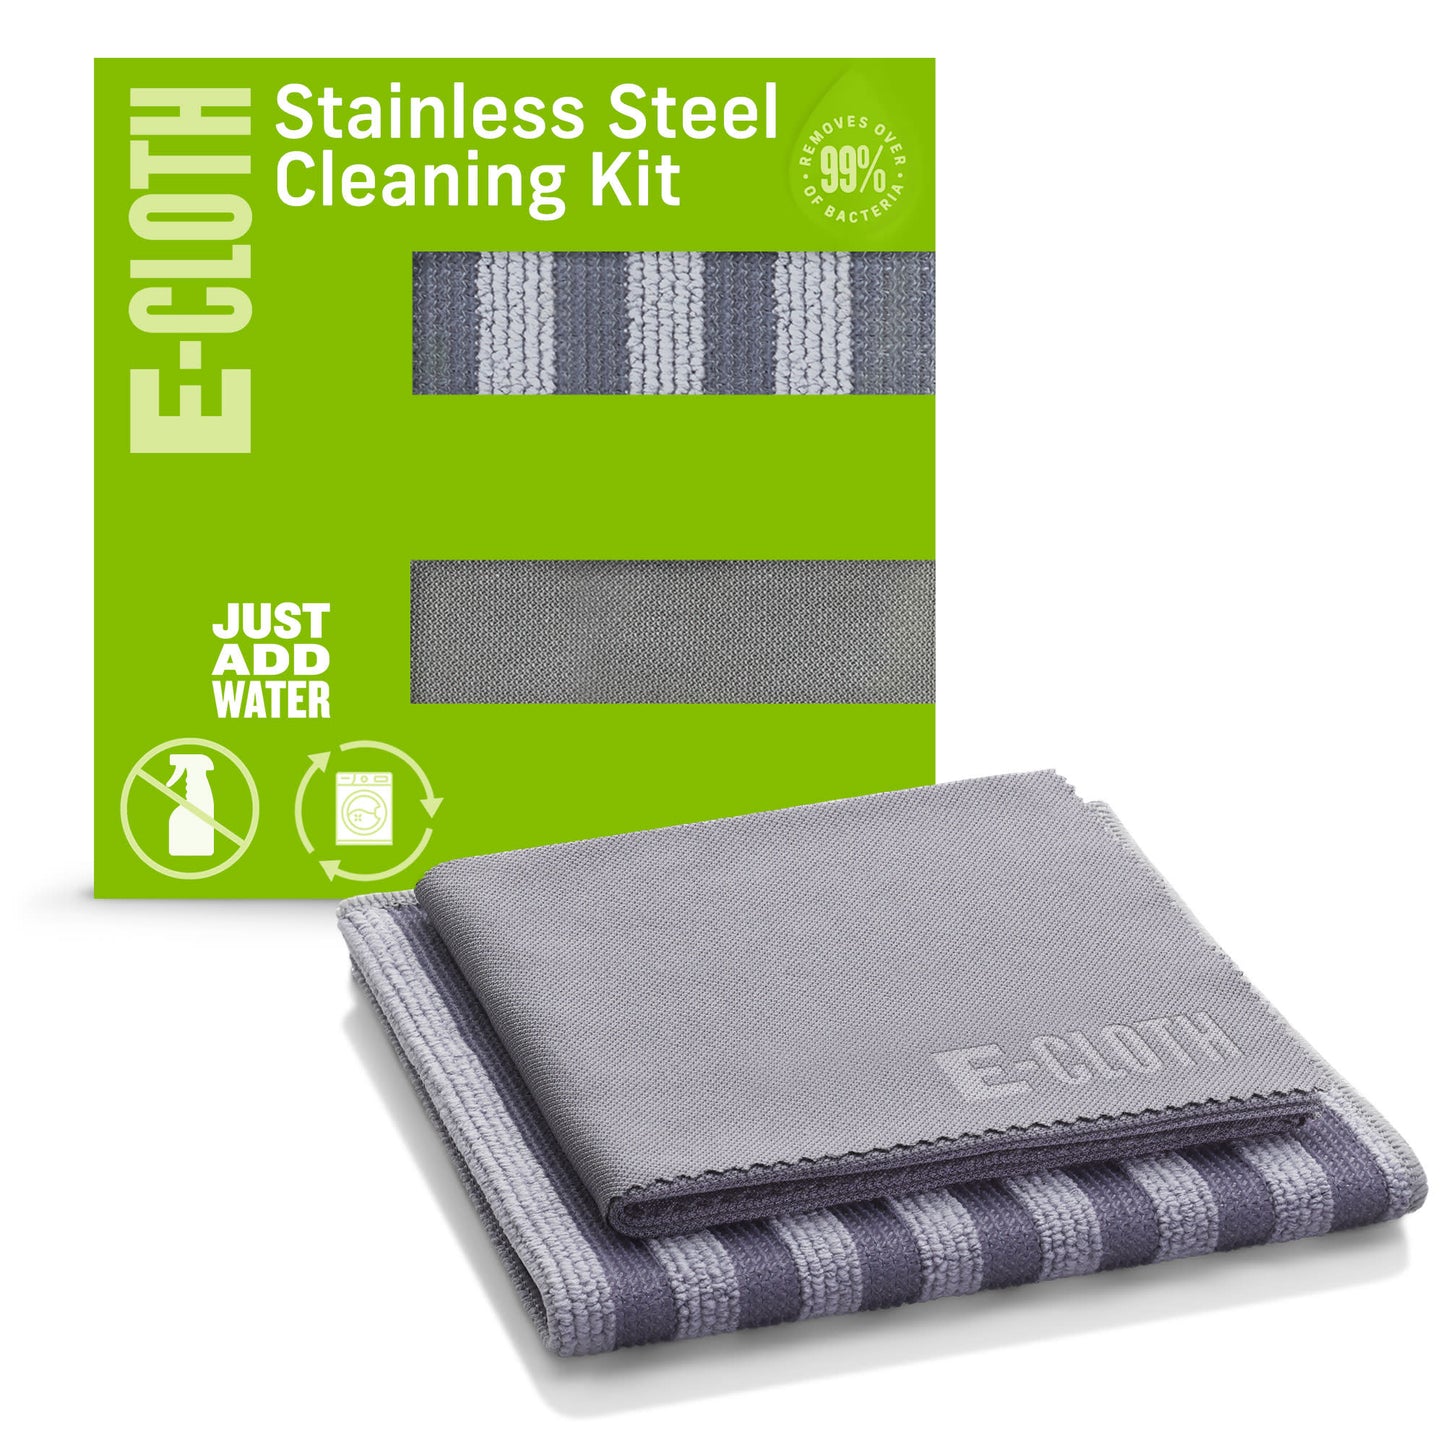 Stainless Steel Cleaning Kit- 2 Cloths